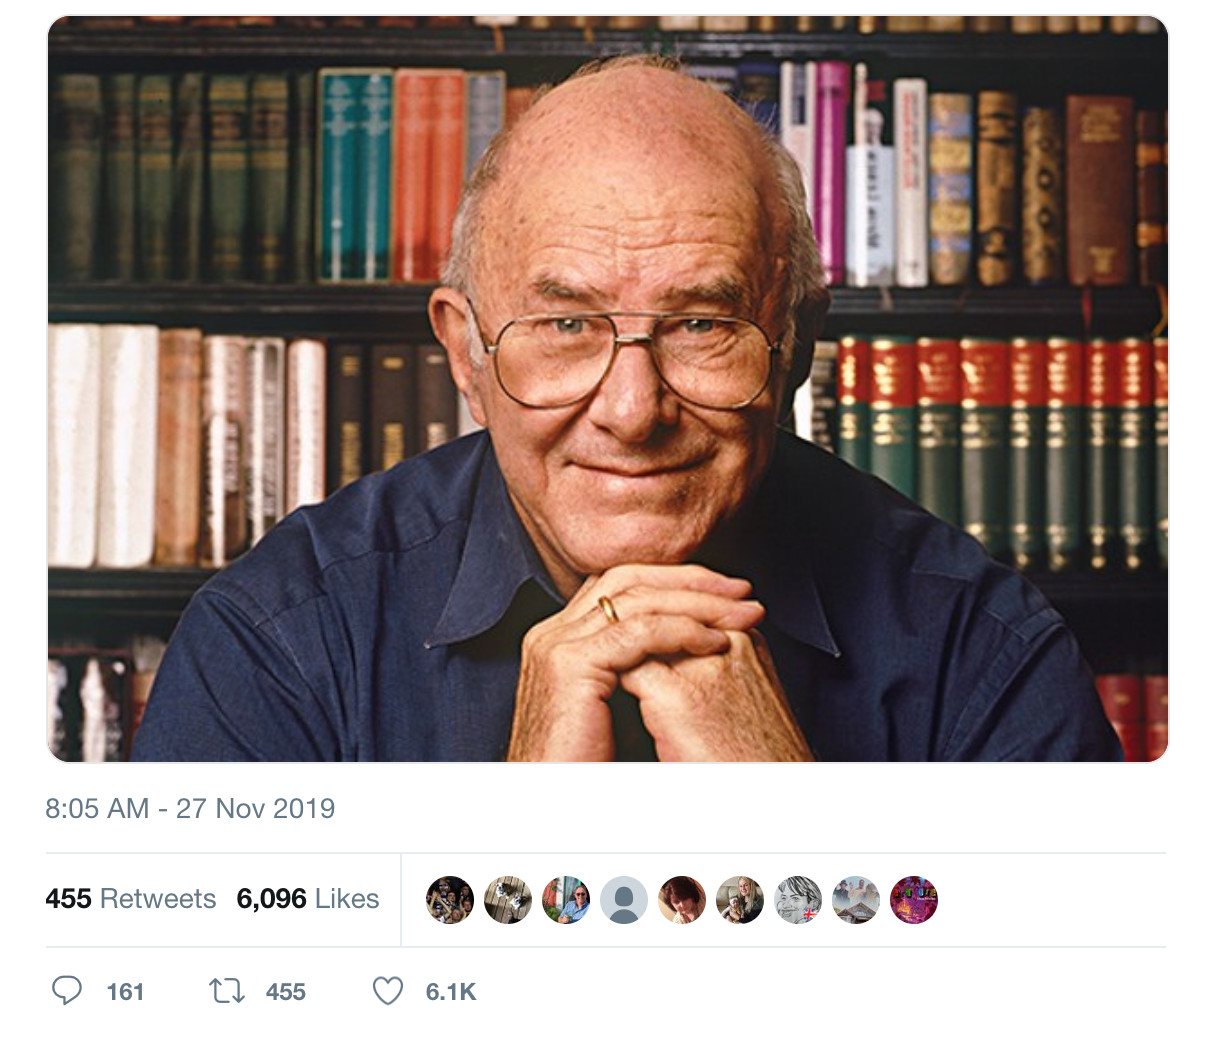 A legend in the field, Clive James dies at 80